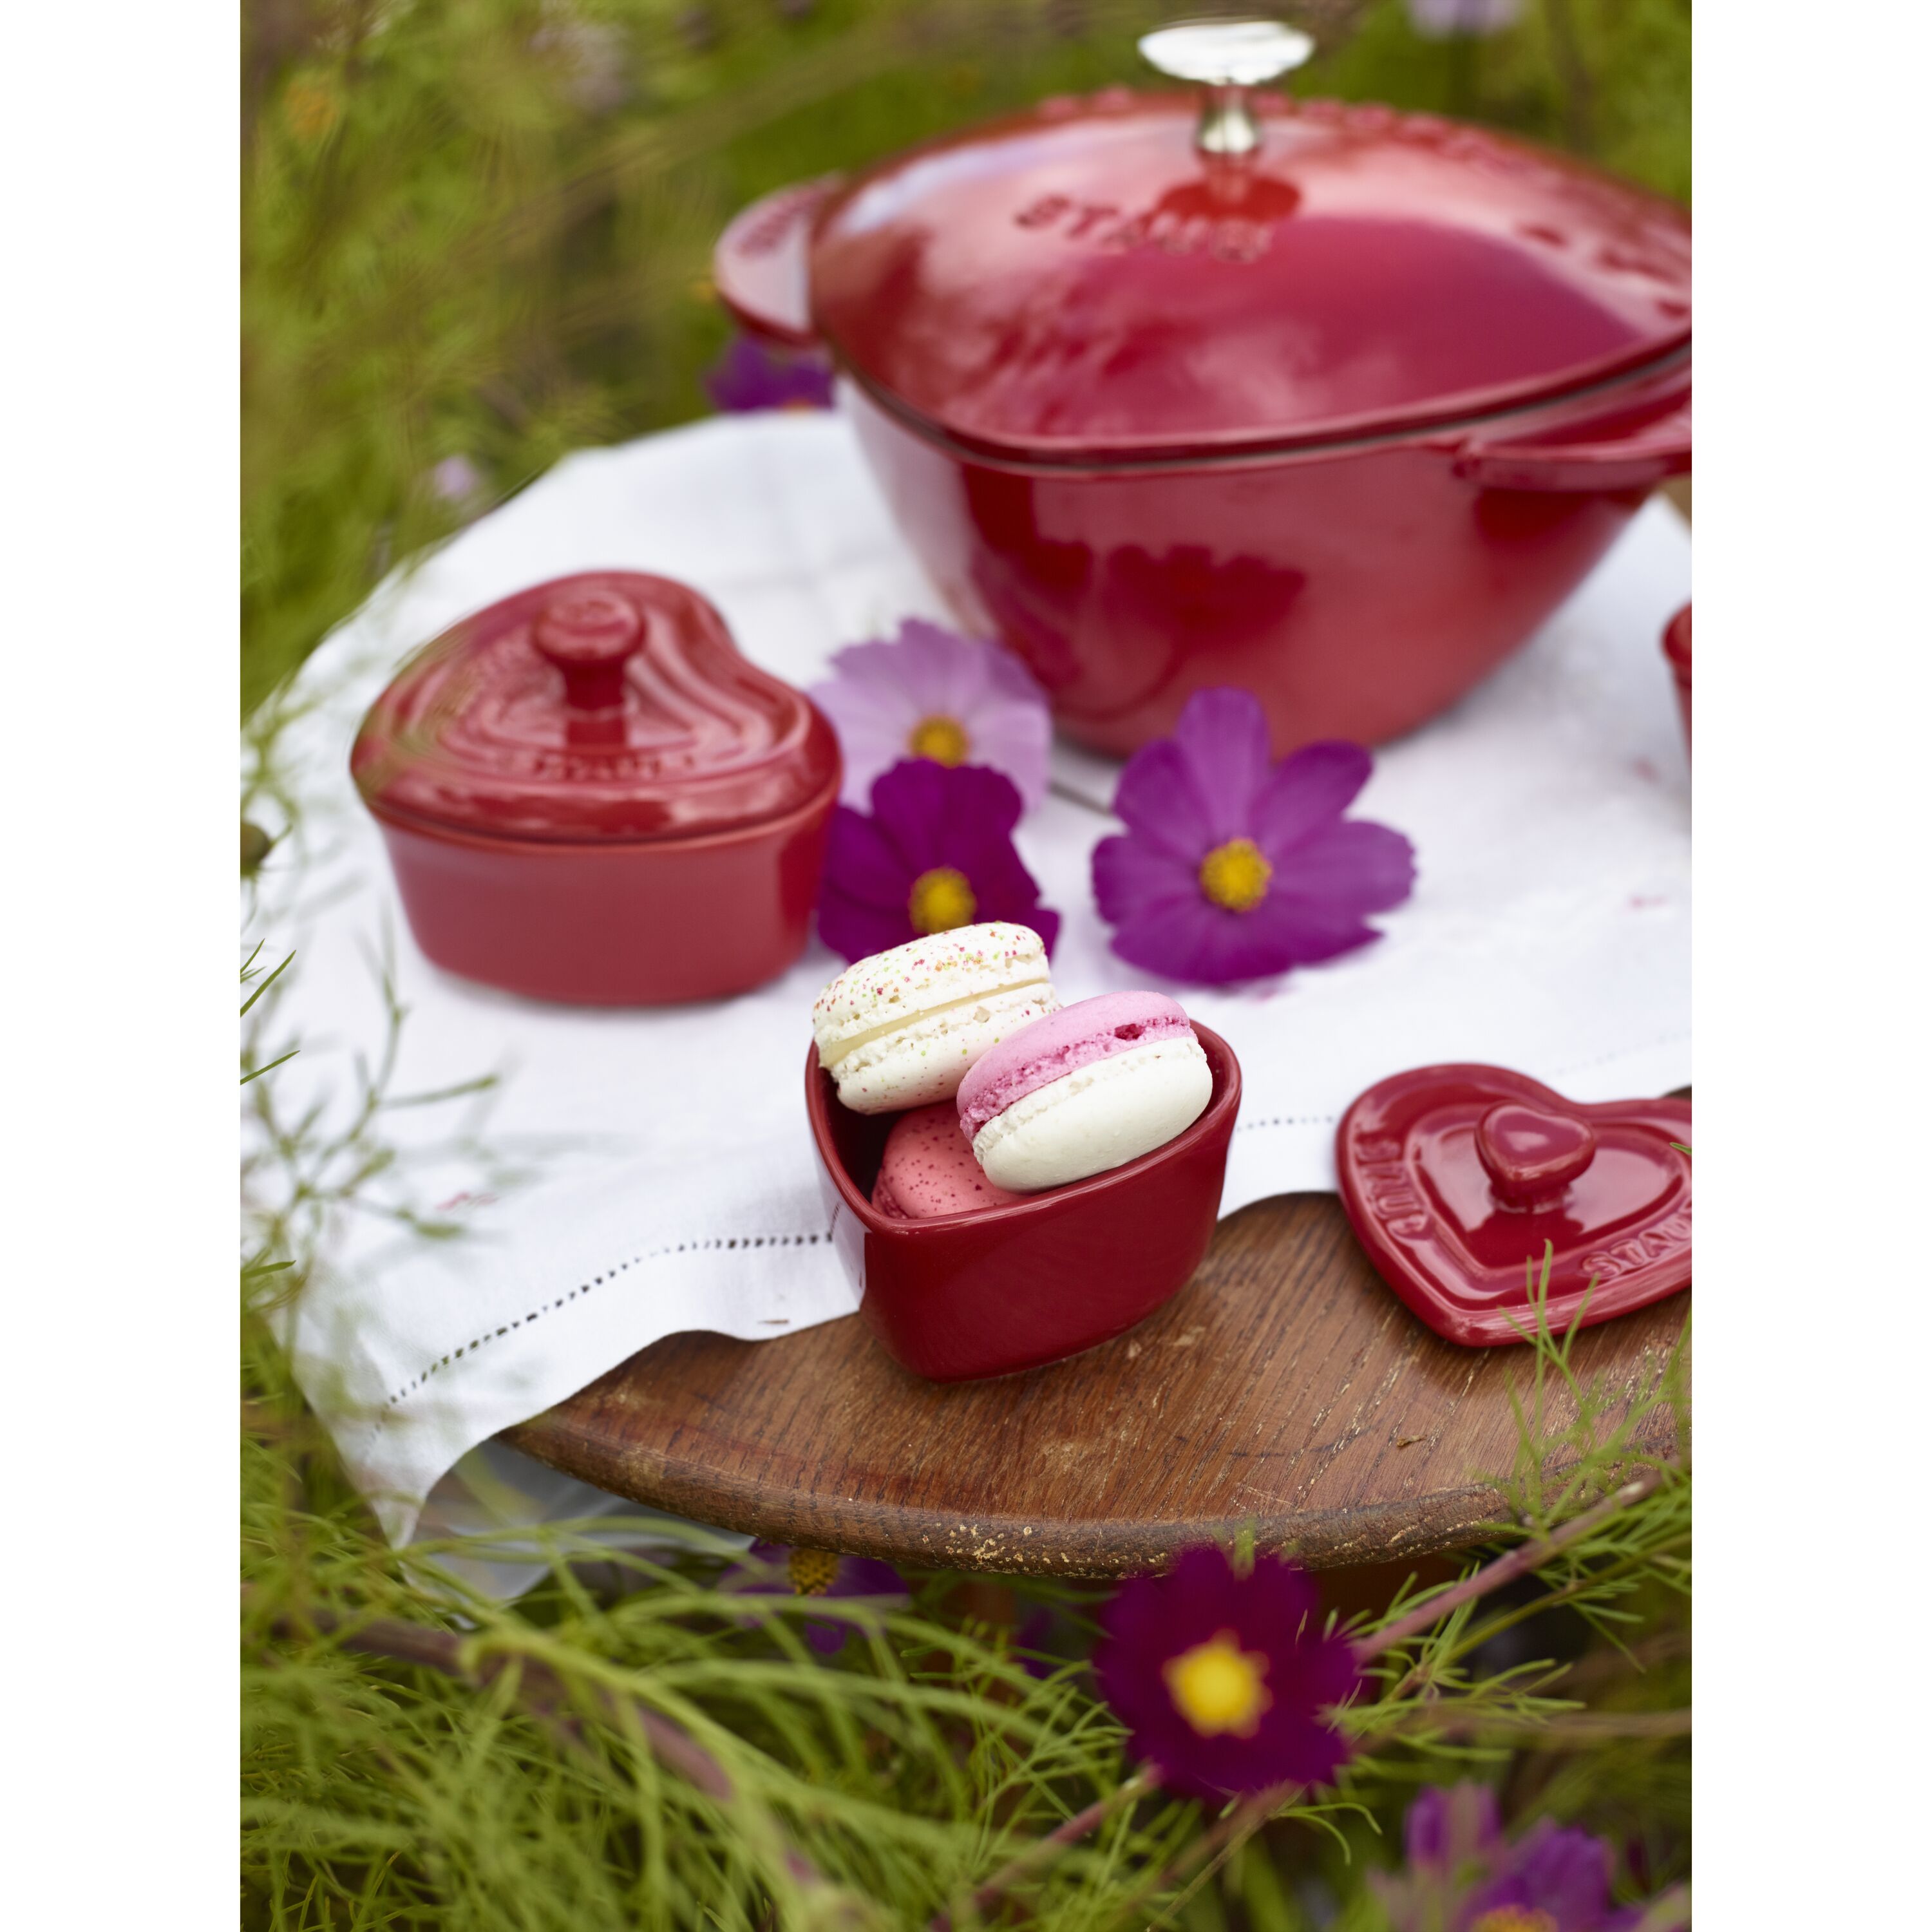 This Heart-Shaped Le Creuset Cocotte Is Perfect for Valentine's